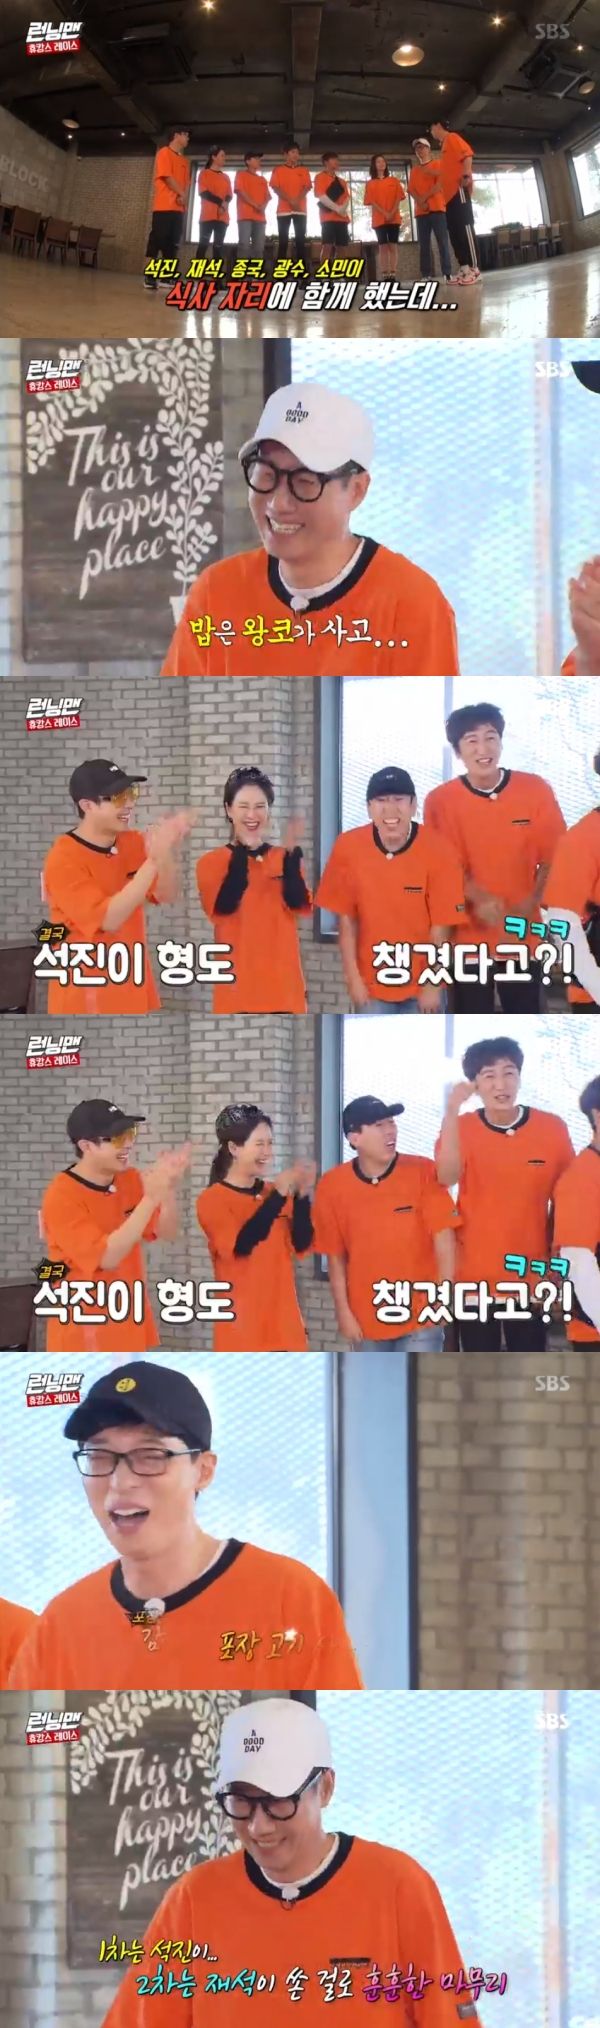 Yoo Jae-Suk has confessed what happened in the fan meeting back-up.On SBS Running Man broadcasted on the 29th, Running Man members who finished fan meeting recalled the time of the back-up meal.On the day of the broadcast, Yoo Jae-Suk opened the door saying that Ji Suk-jin served the meal.My brother Seok-jin asked me to all have a meal together after fan meeting; we had five delicious (suppers), Yoo Jae-Suk said.I ate meat and I was so delicious that I asked for a few pieces, and my brother looked at me, he said. I told him I would know because I lived.Lee Kwang-soo, who was with him in the backyard, added, Bob was bought by his brother, and (we) Park Jae-seok greeted his brother.Ji Suk-jin pointed to Yoo Jae-Suk and said, I only greeted him.Yoo Jae-Suk said, (Ji Suk-jin also) Park Jae-seok I went to eat well.